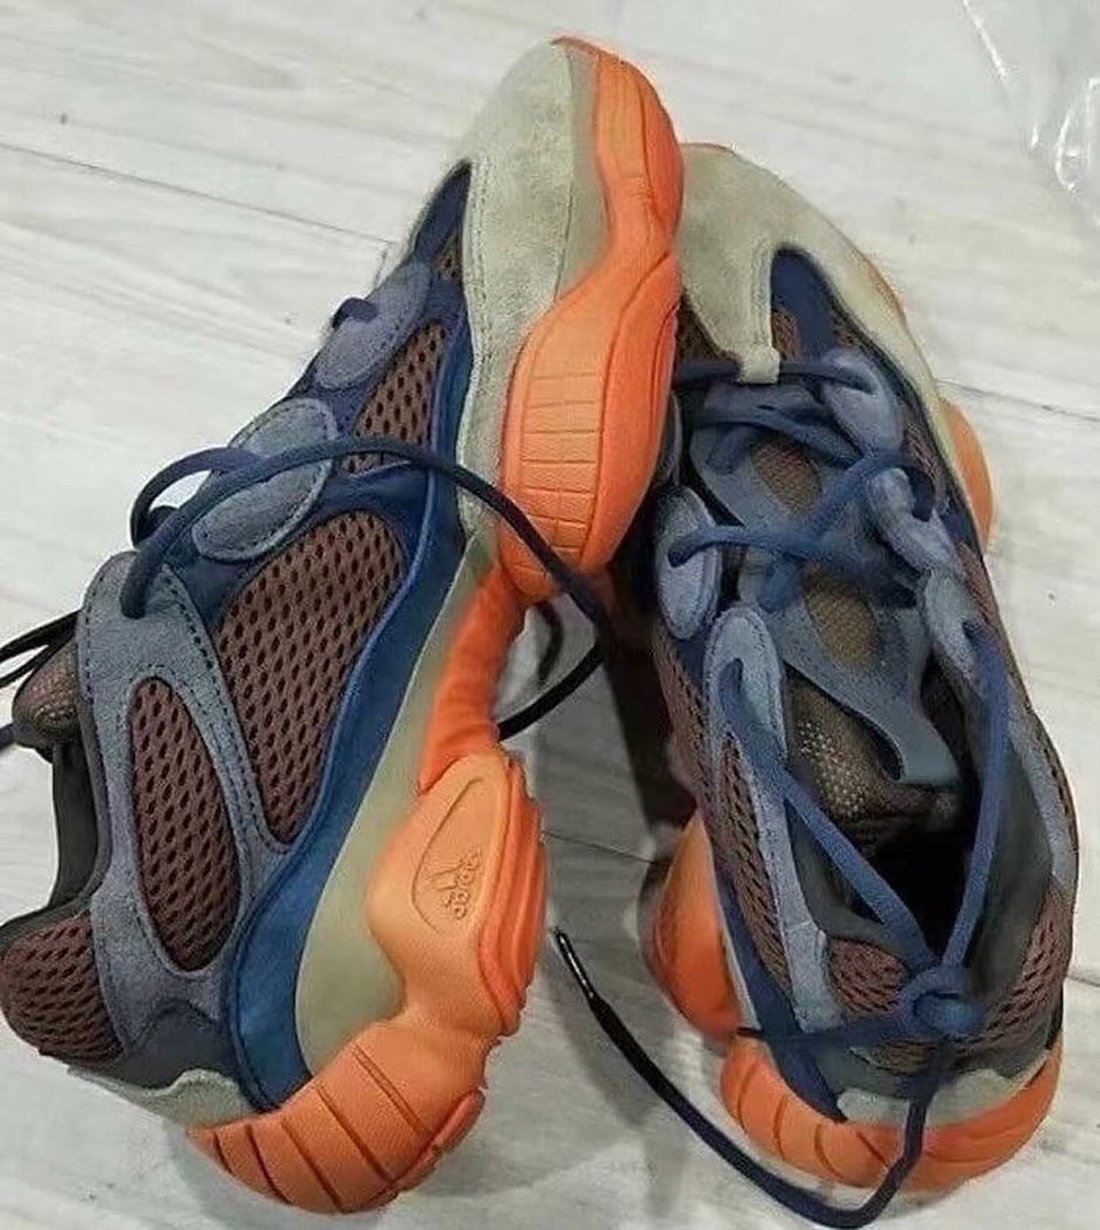 adidas-Yeezy-500-Enflame-Release-Date-3